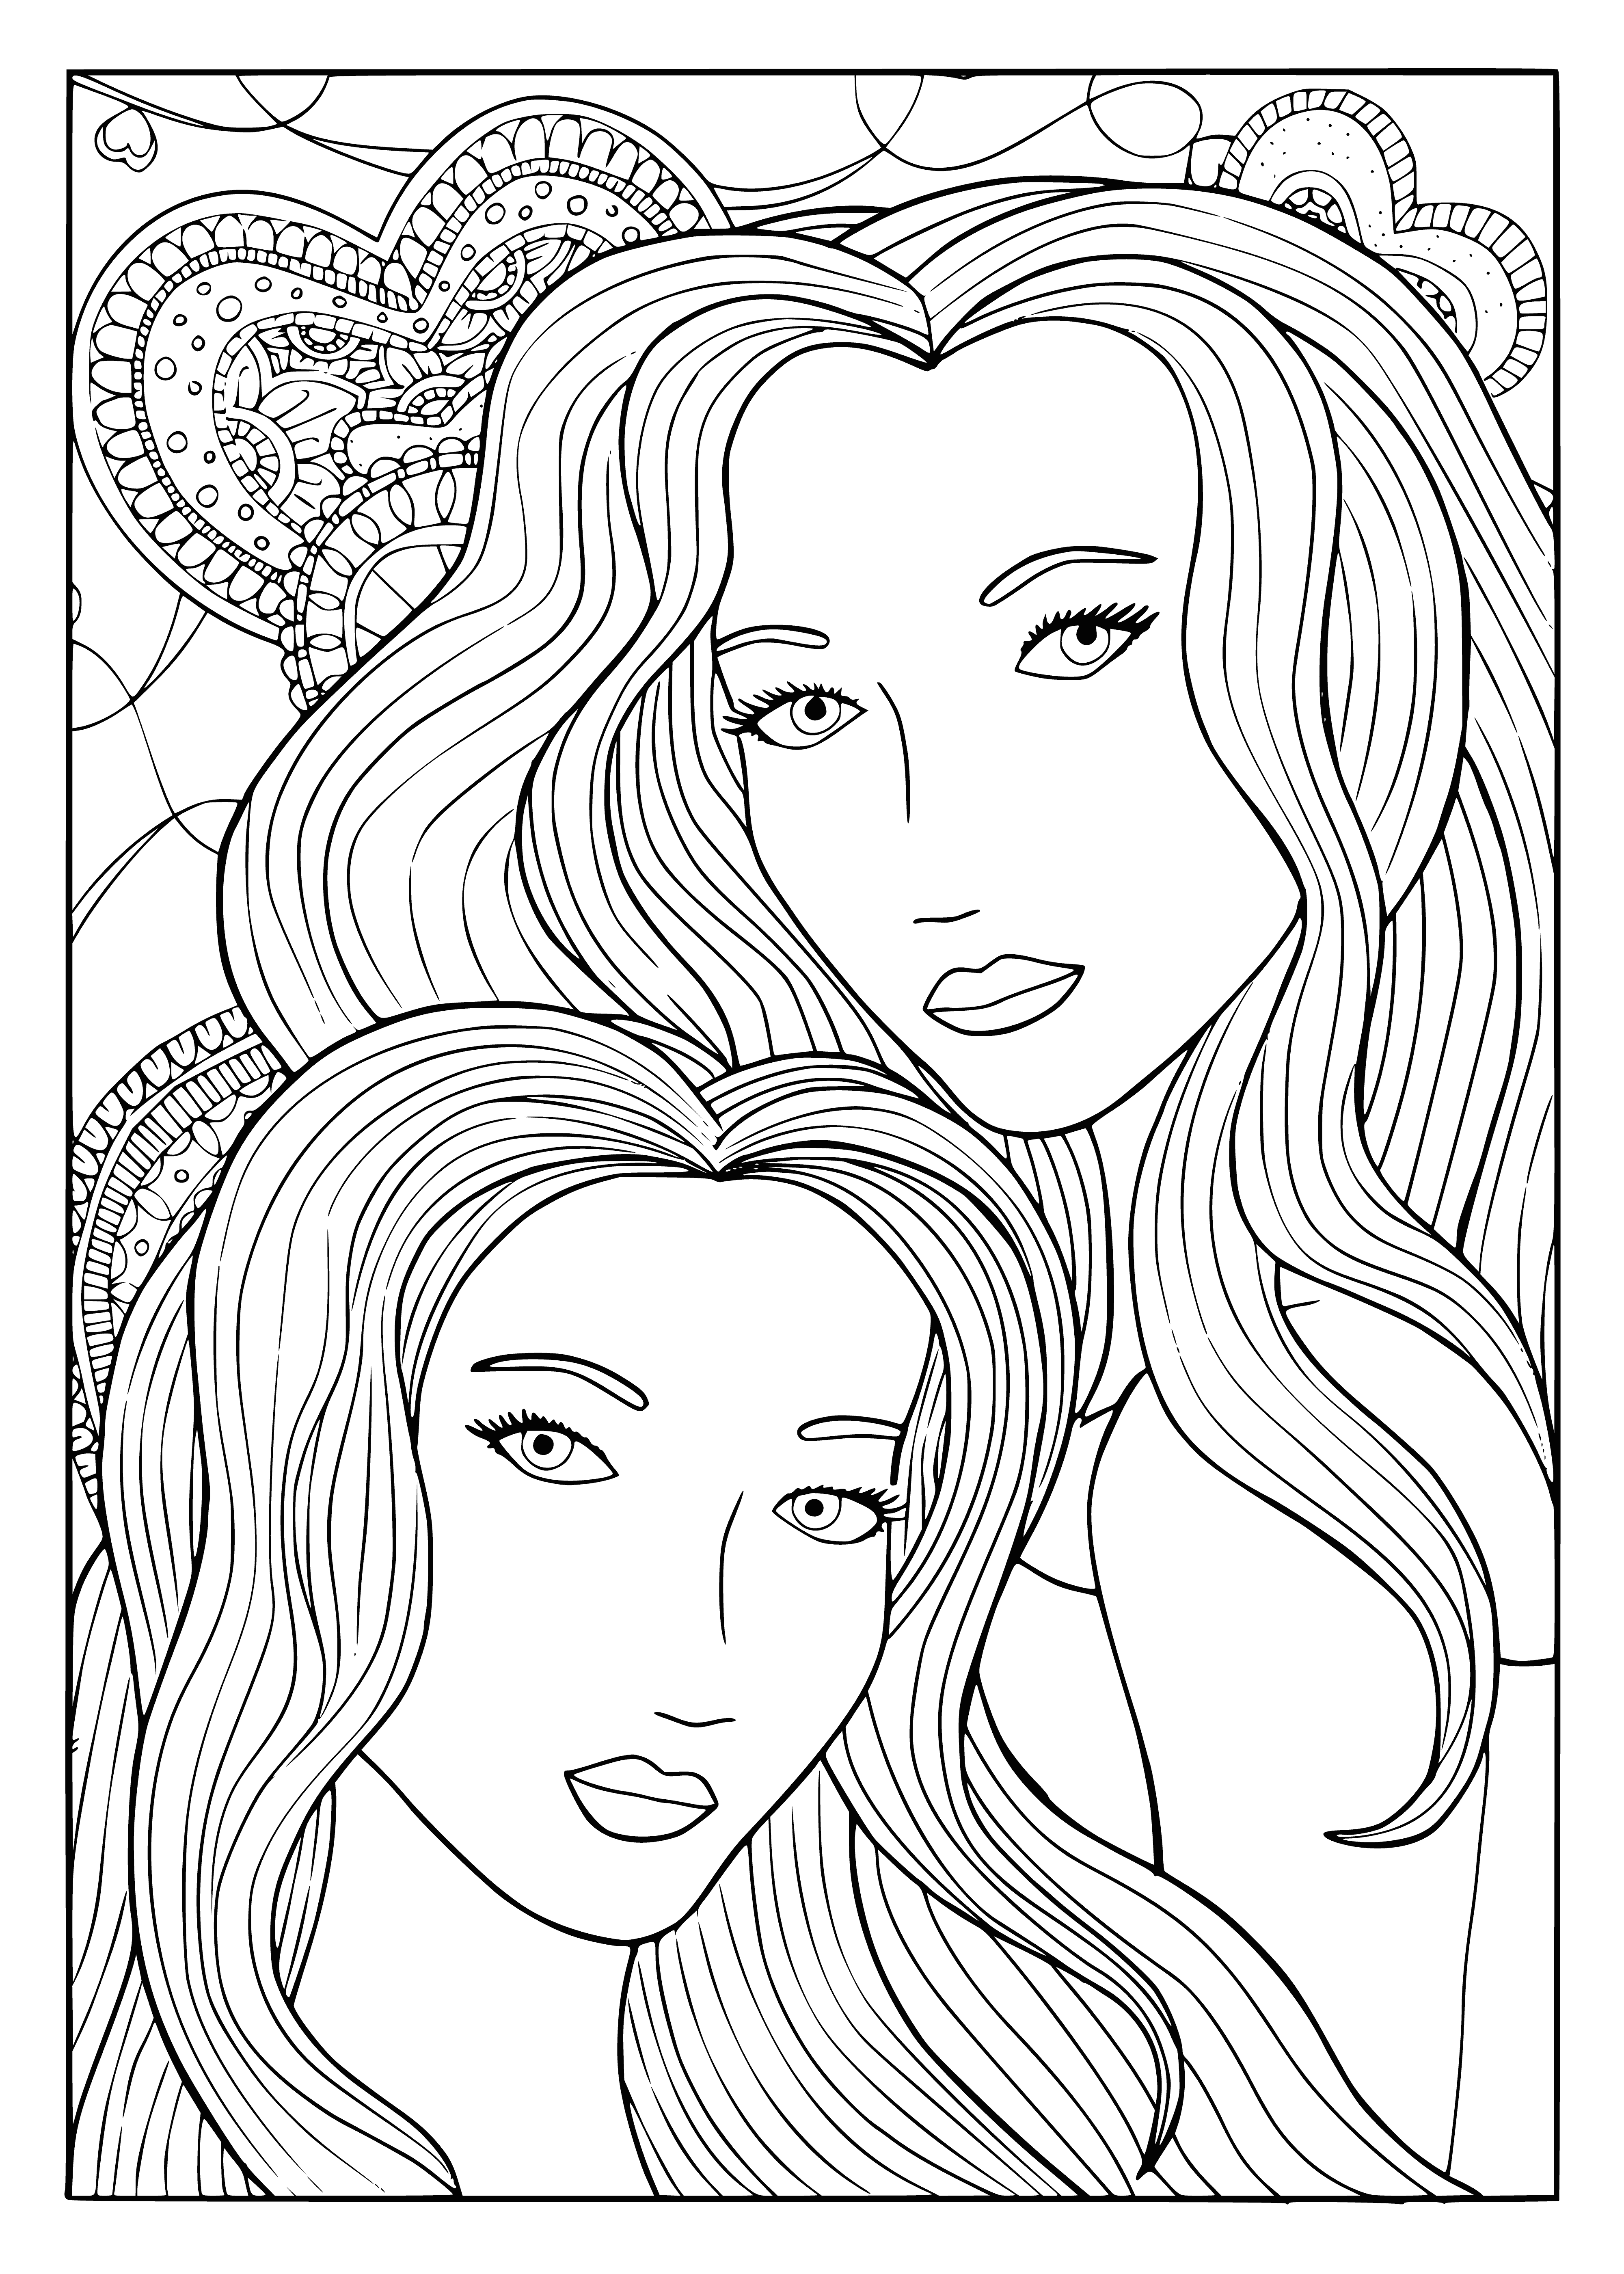 coloring page: Two girls stand arm-in-arm, their faces smiling in front of a brick wall. One wears a white floral dress, one pink. Both have flowing hair in the wind. #friendship